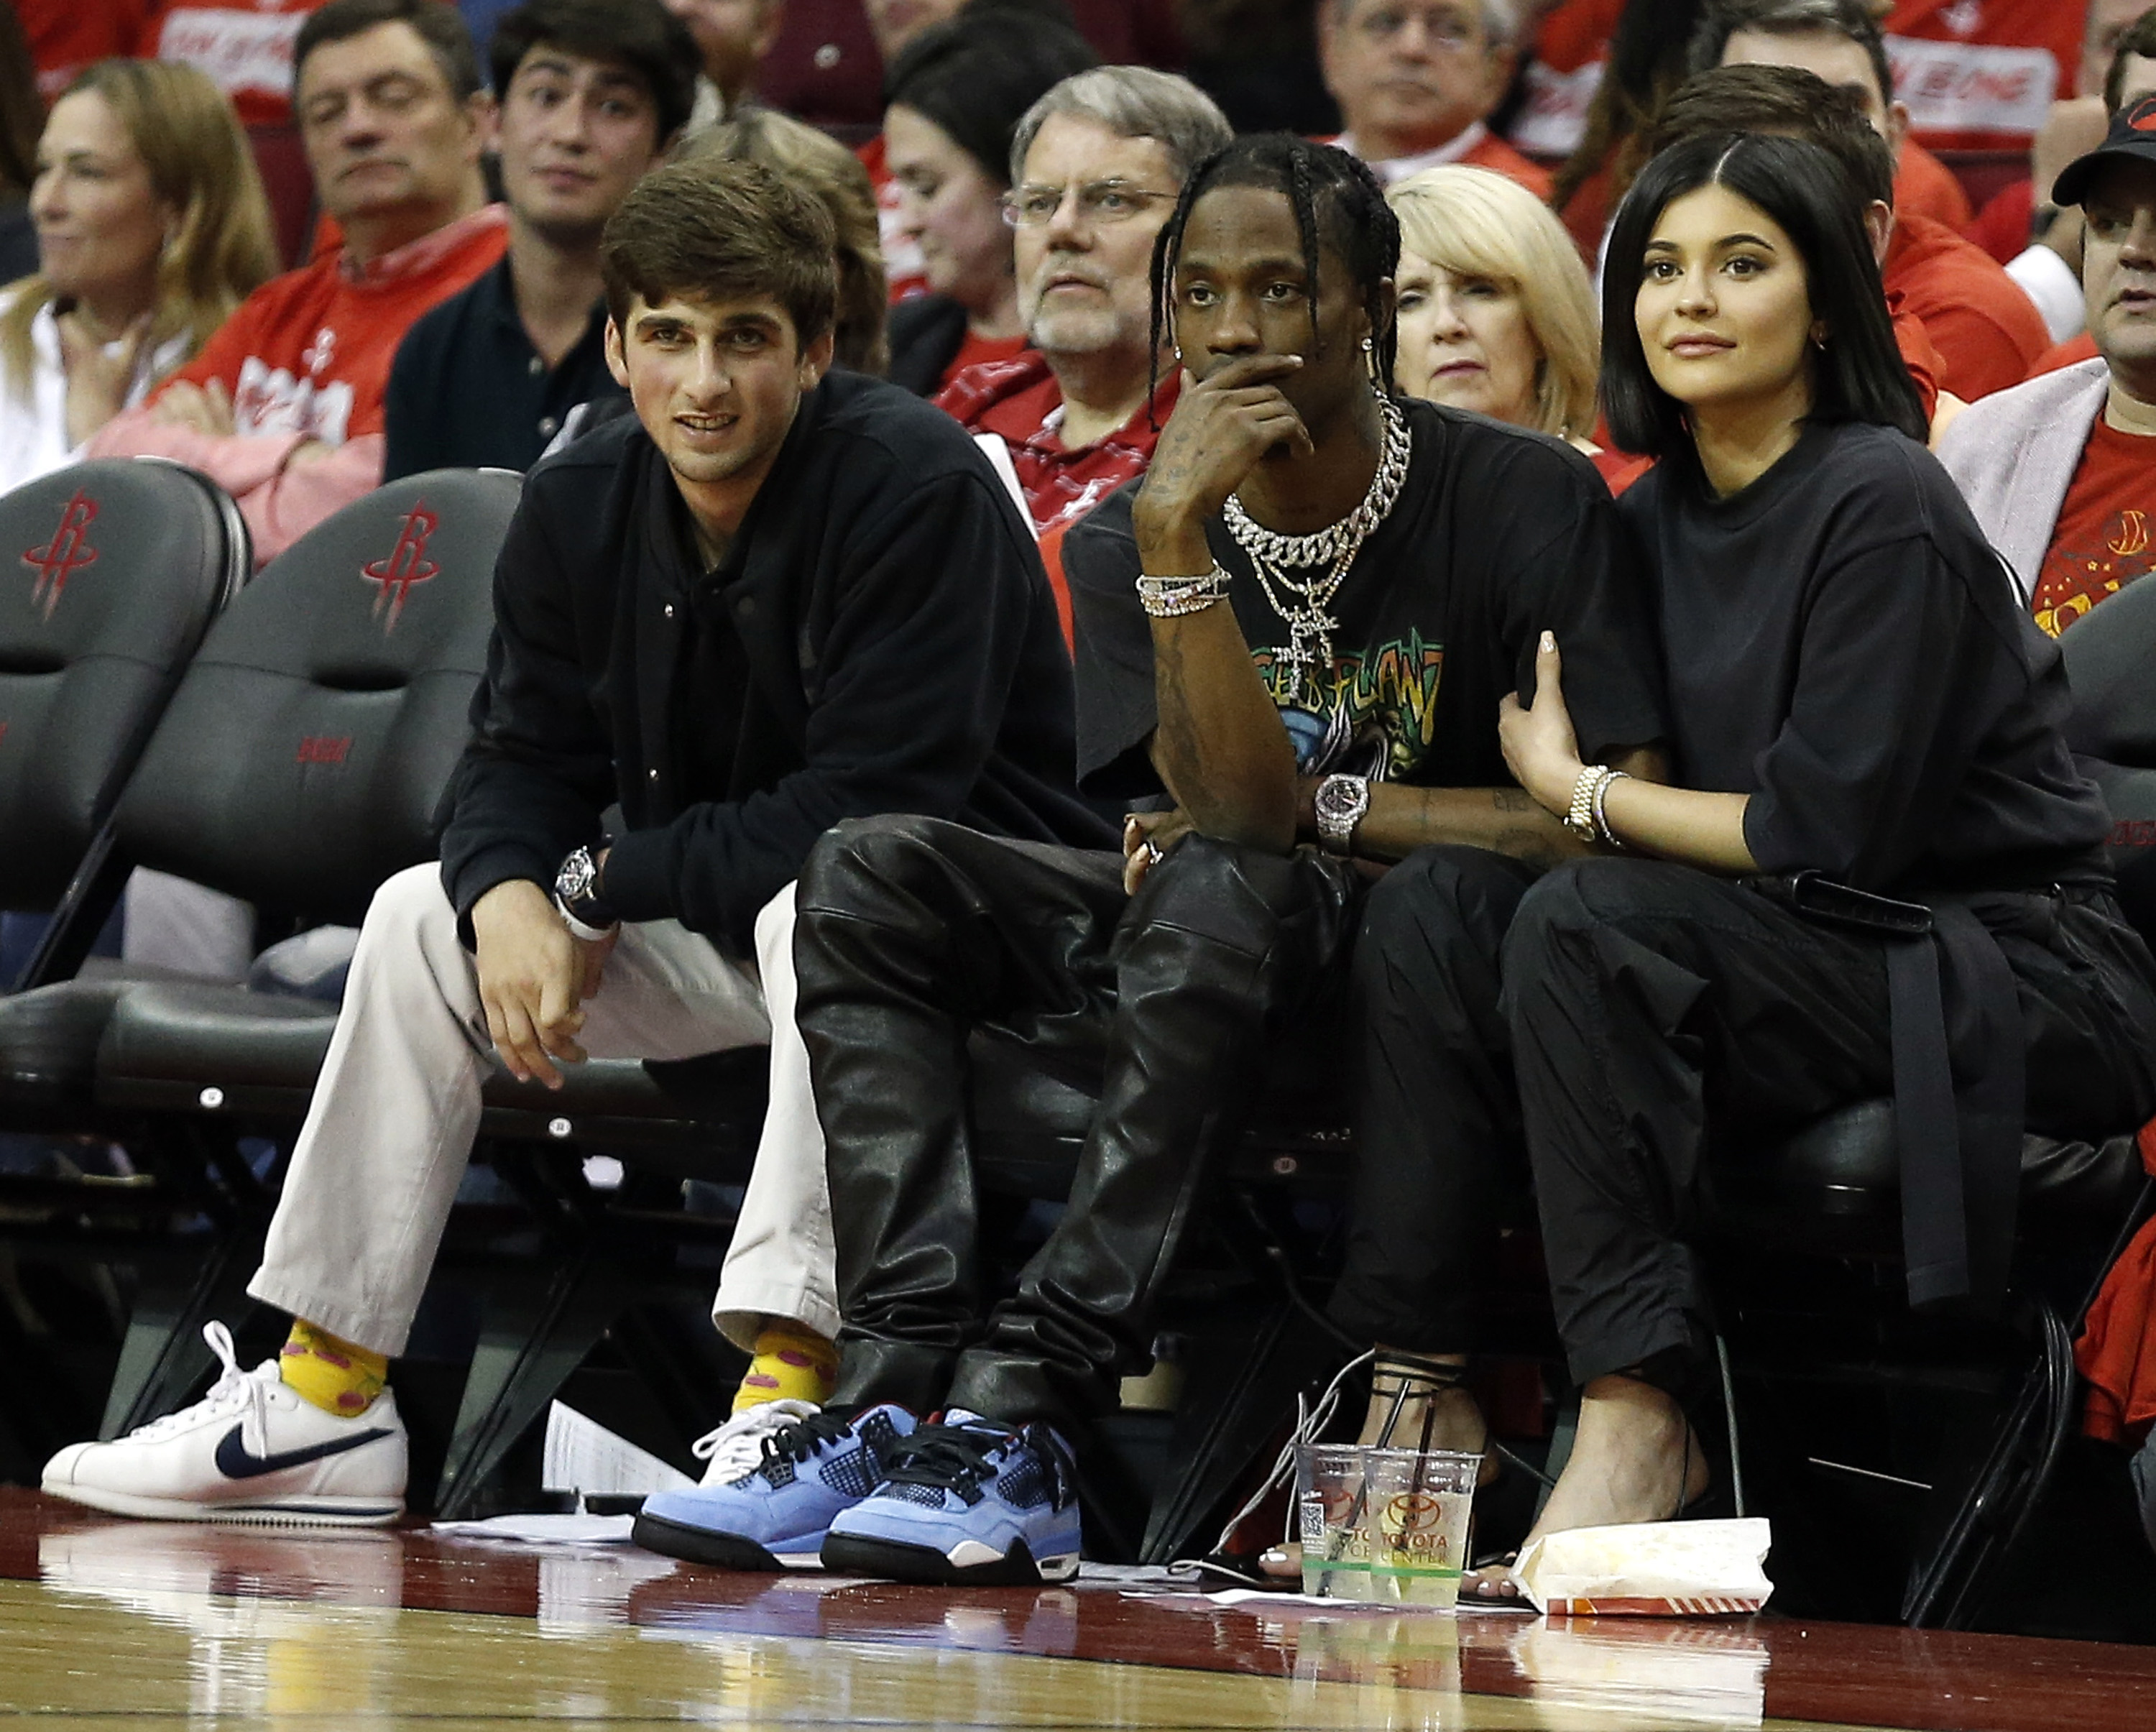 HOUSTON, TX - APRIL 18: Travis Scott and Kylie Jenner sit court-side during Game Two of the first round of the Western Conference playoffs at Toyota Center on April 18, 2018 in Houston, Texas. 